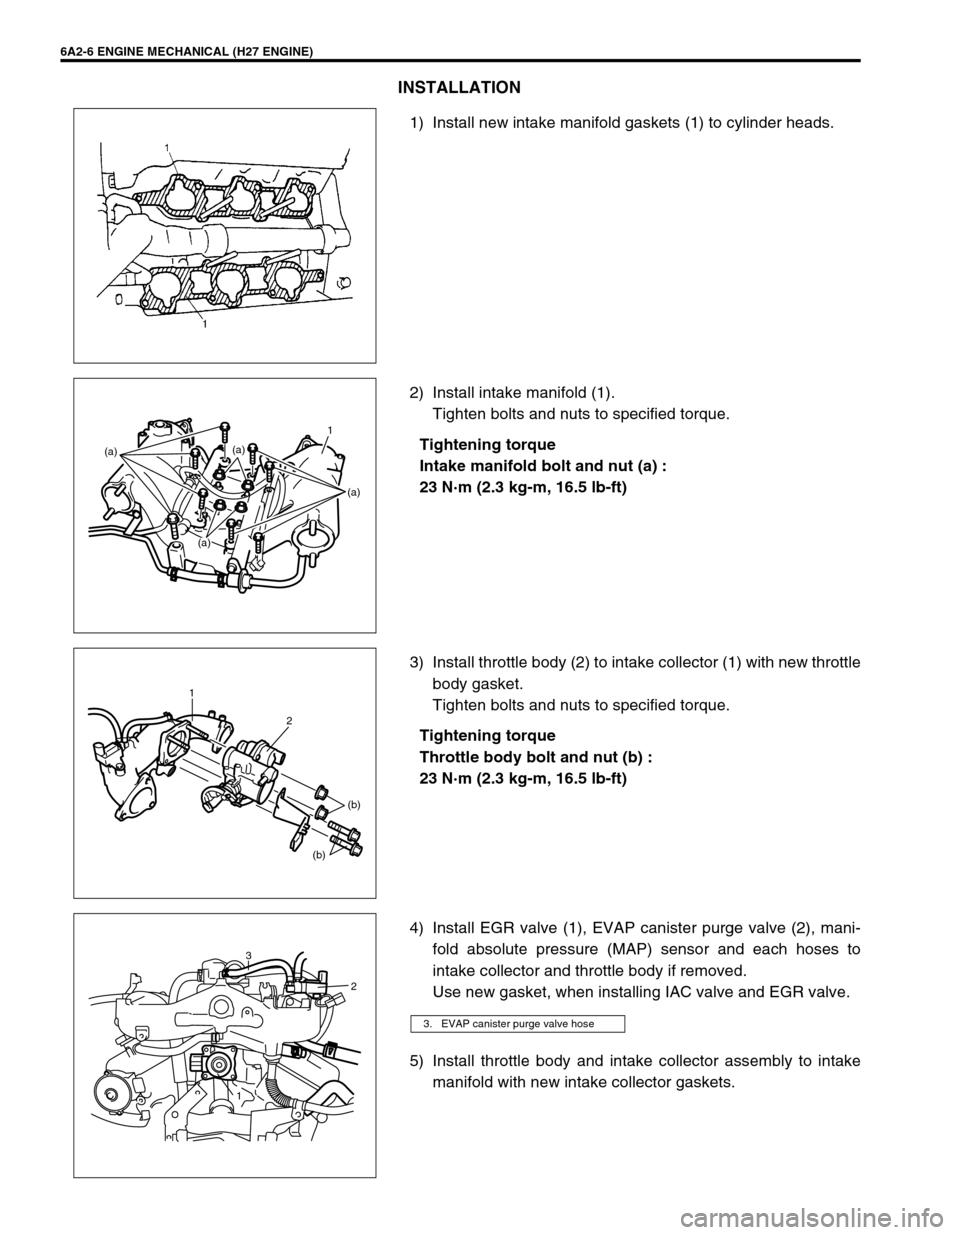 SUZUKI GRAND VITARA 1999 2.G Owners Guide 6A2-6 ENGINE MECHANICAL (H27 ENGINE)
INSTALLATION
1) Install new intake manifold gaskets (1) to cylinder heads.
2) Install intake manifold (1).
Tighten bolts and nuts to specified torque.
Tightening t